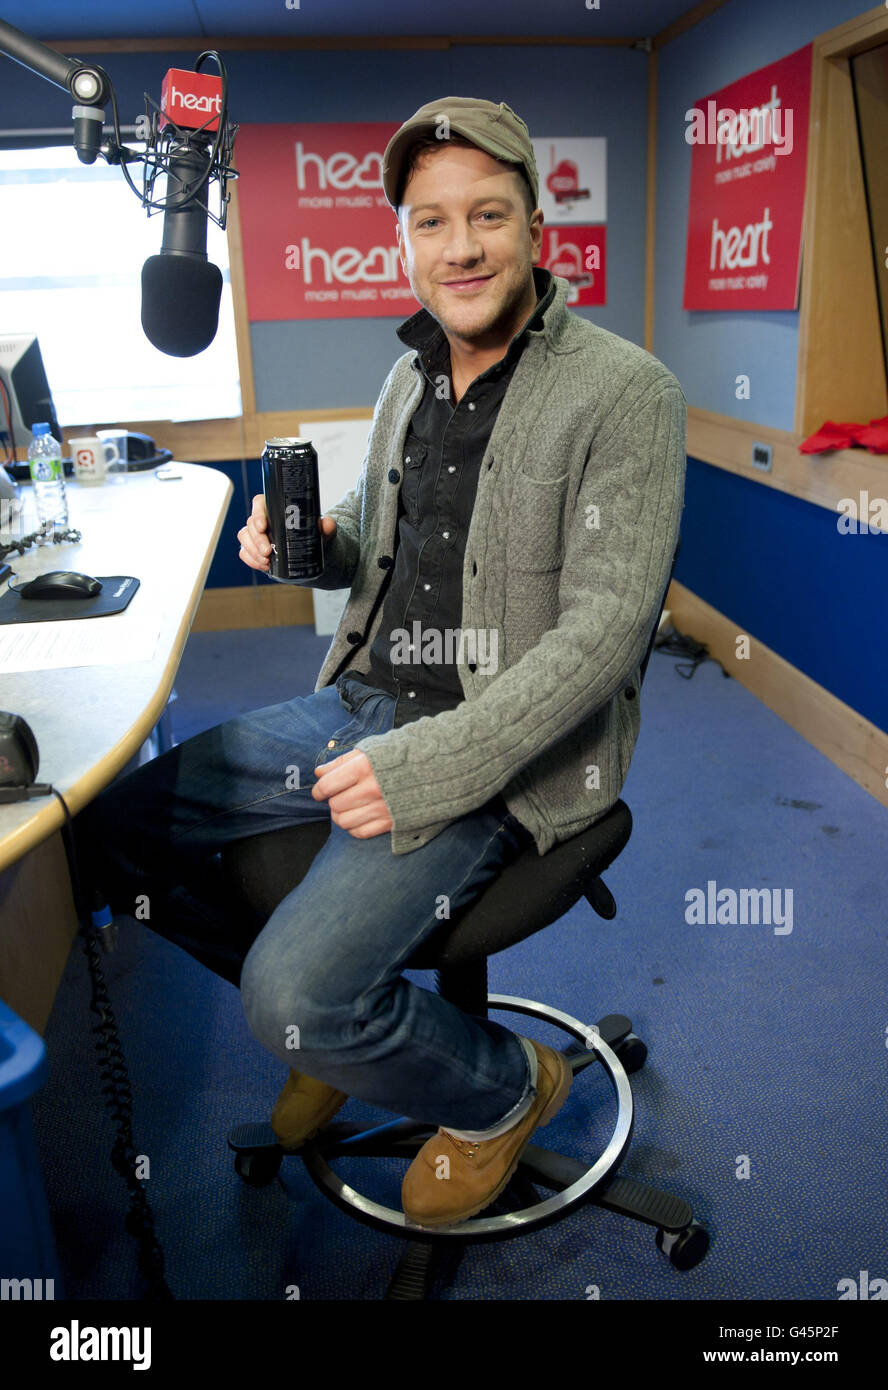 Matt Cardle pictured during the 2011 Have a Heart appeal, Heart FM's charity raising money for Children's Hospices UK, at the Heart FM studios in central London. Stock Photo